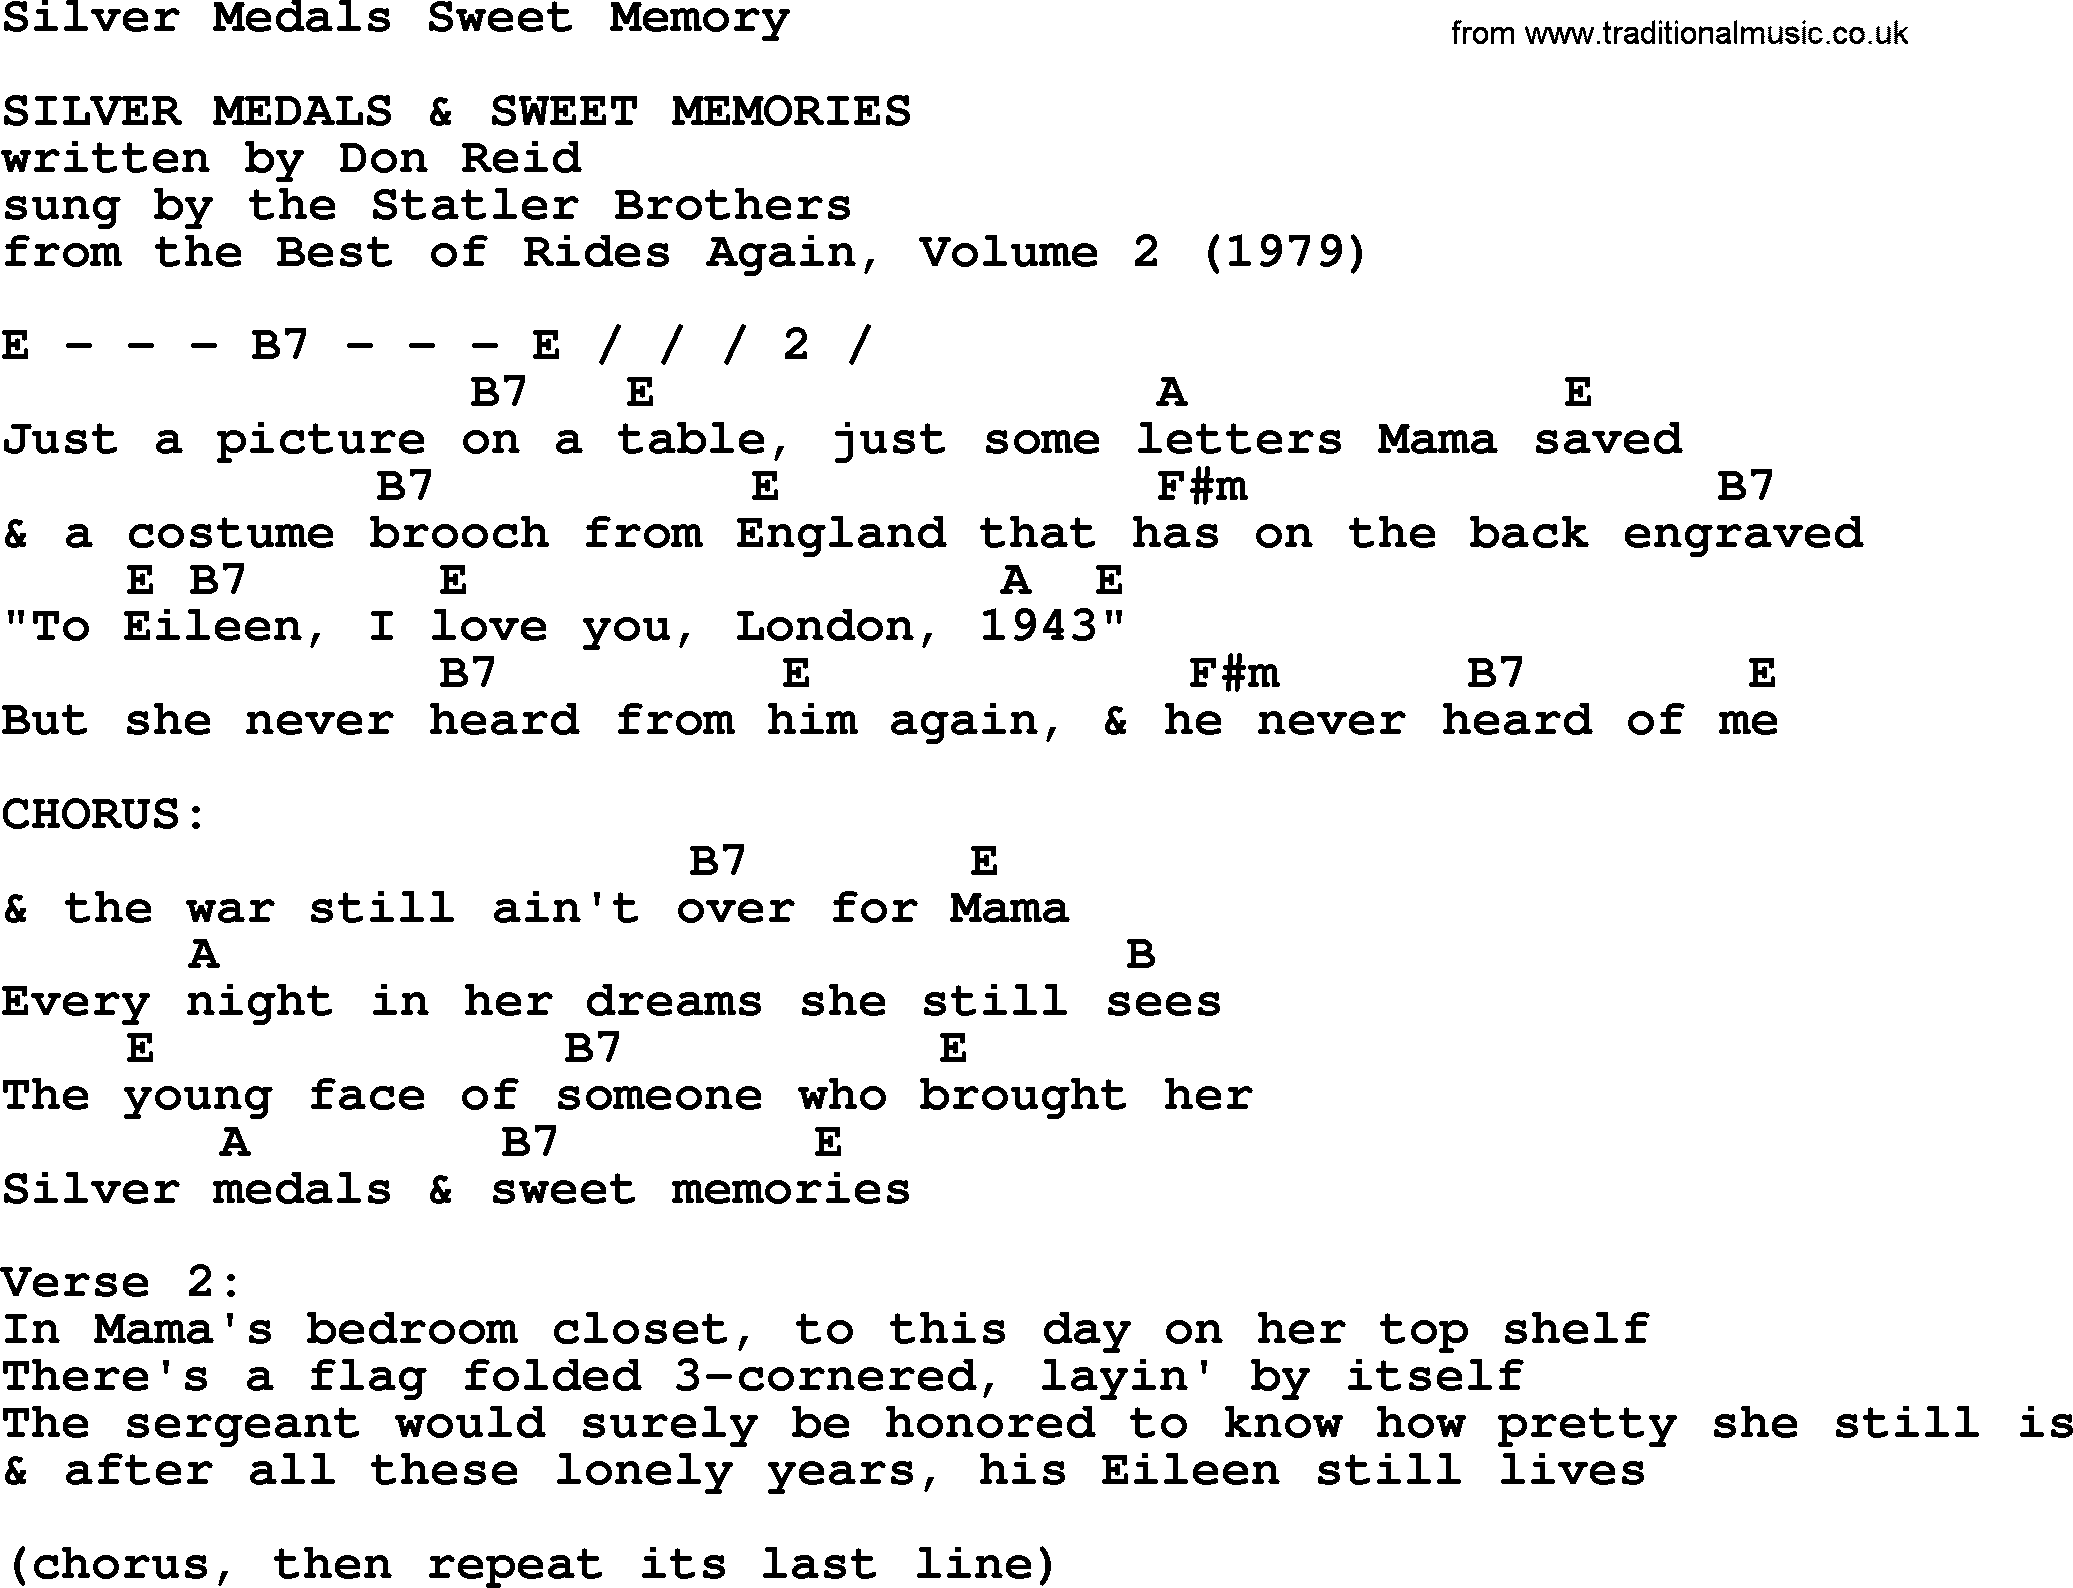 Bluegrass song: Silver Medals Sweet Memory, lyrics and chords